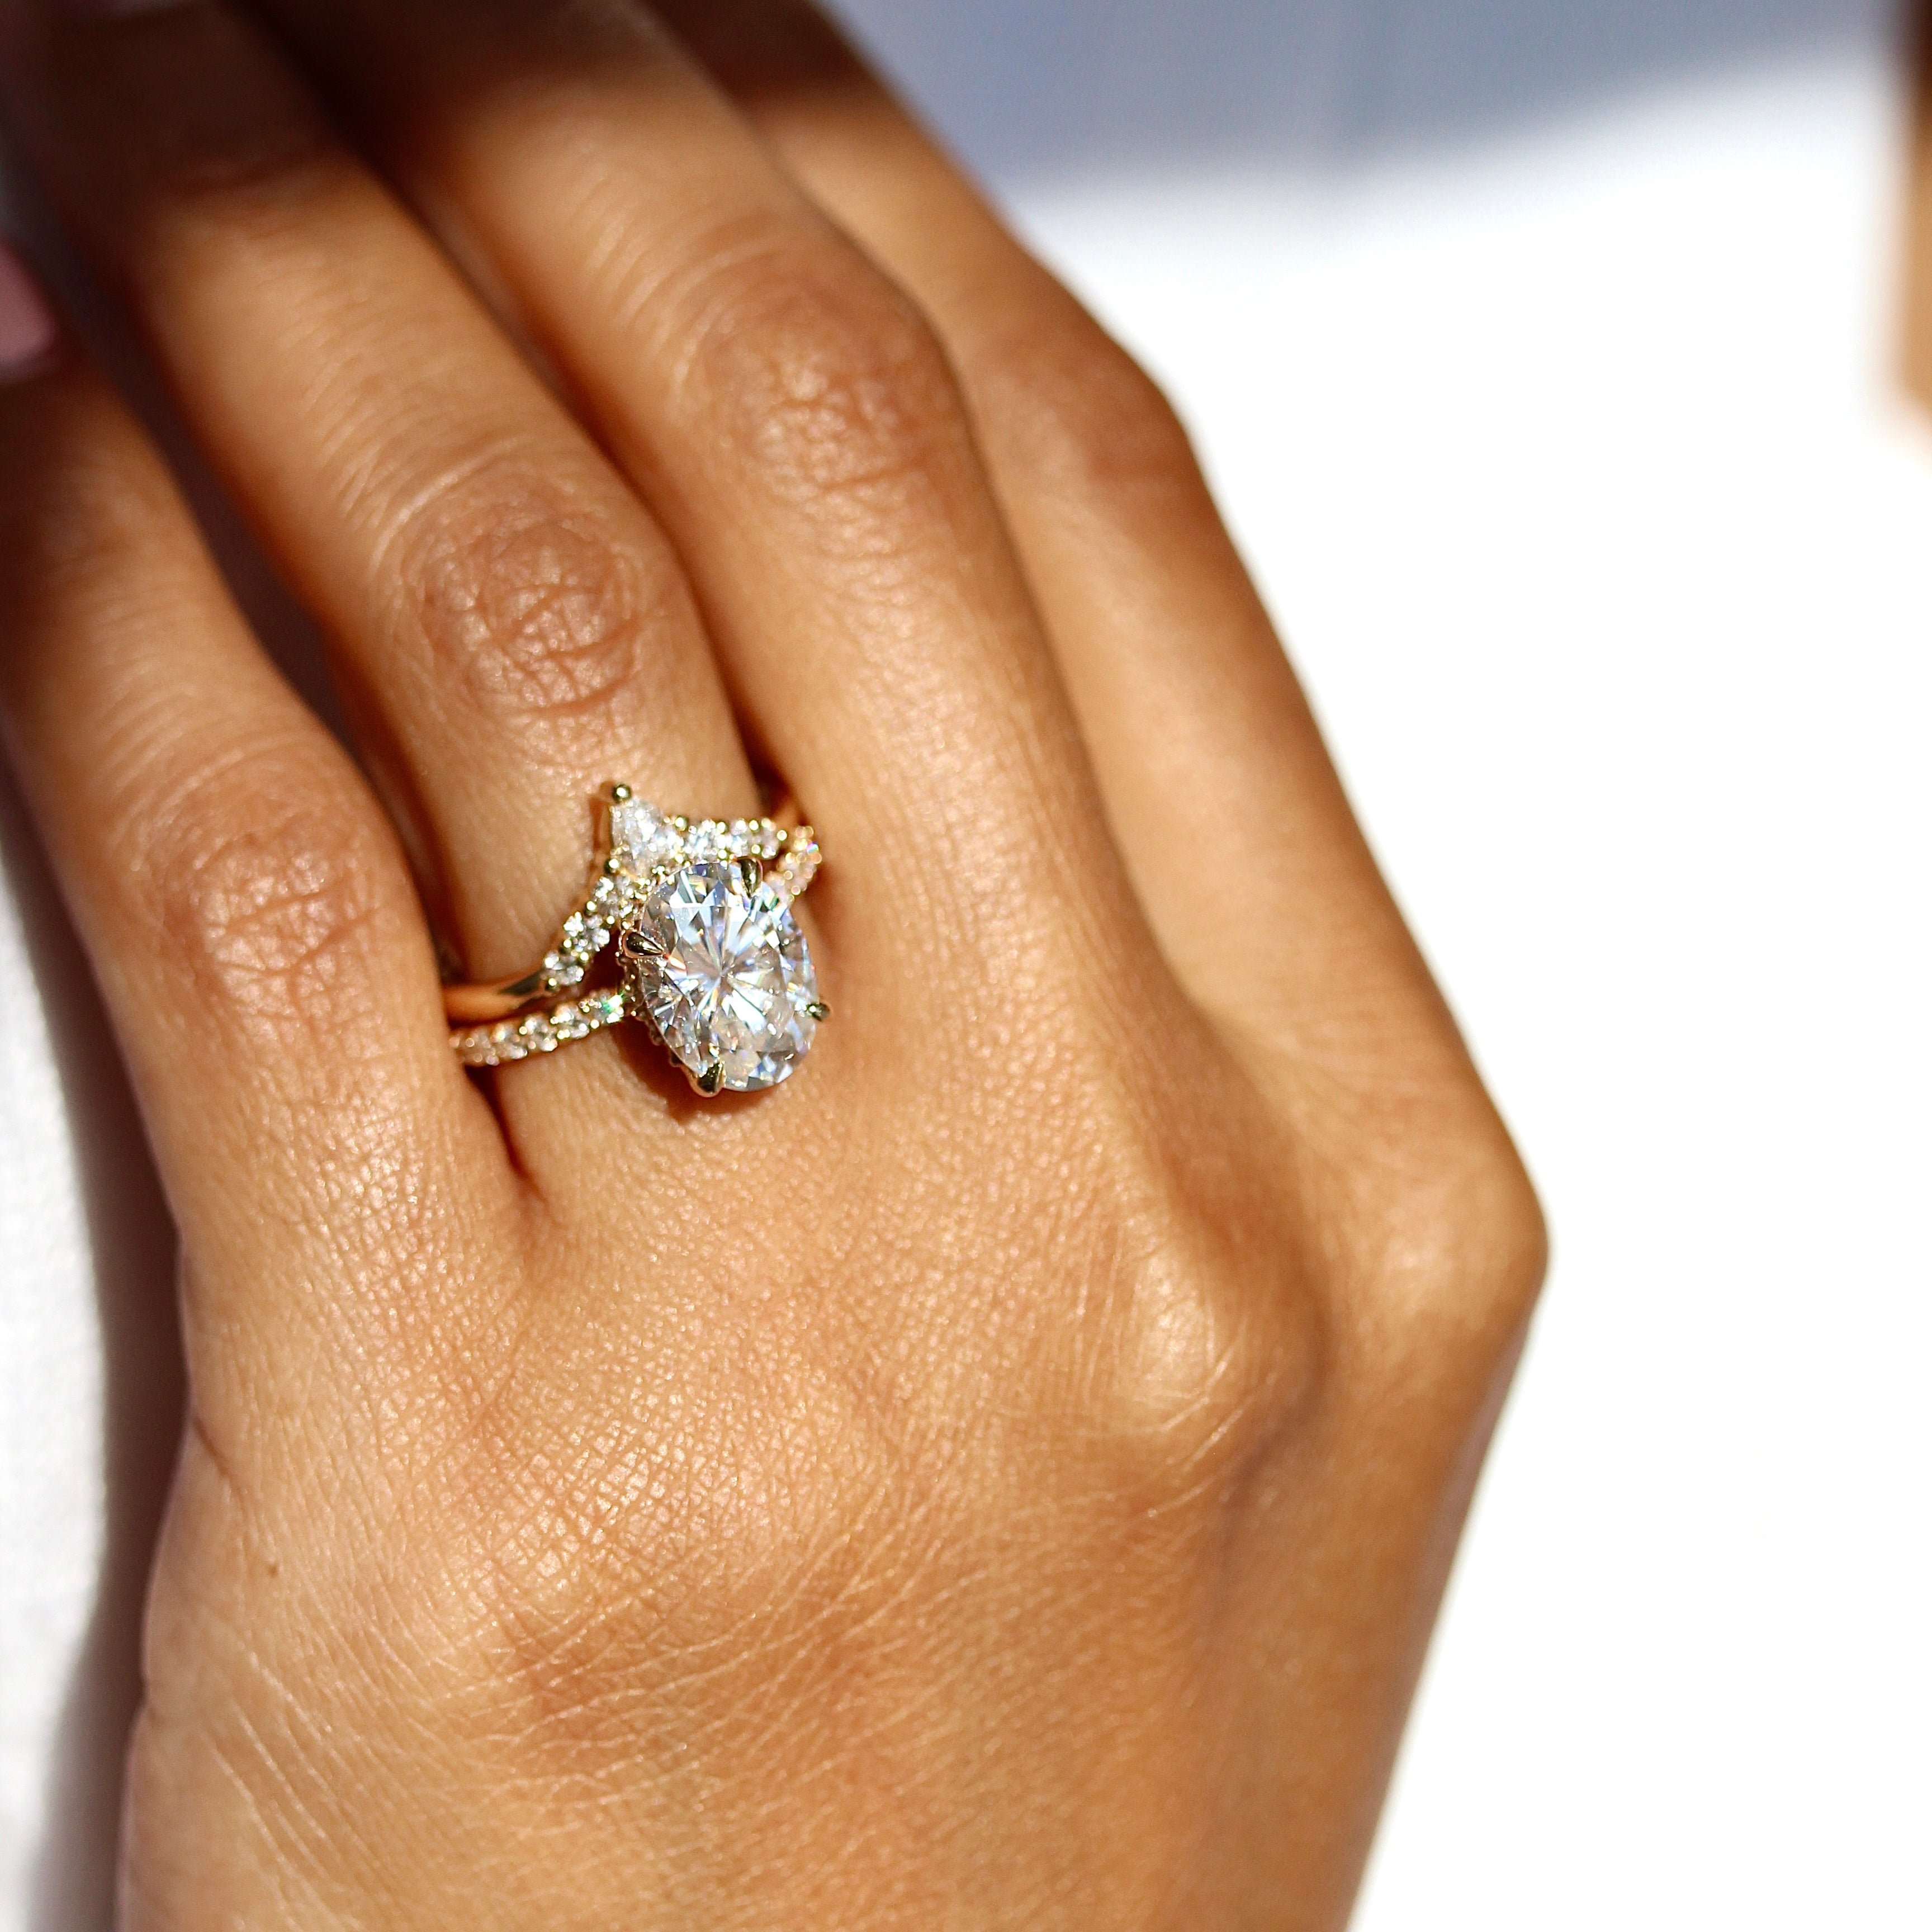 The Best Diamond Types for Engagement Rings | Blue Nile